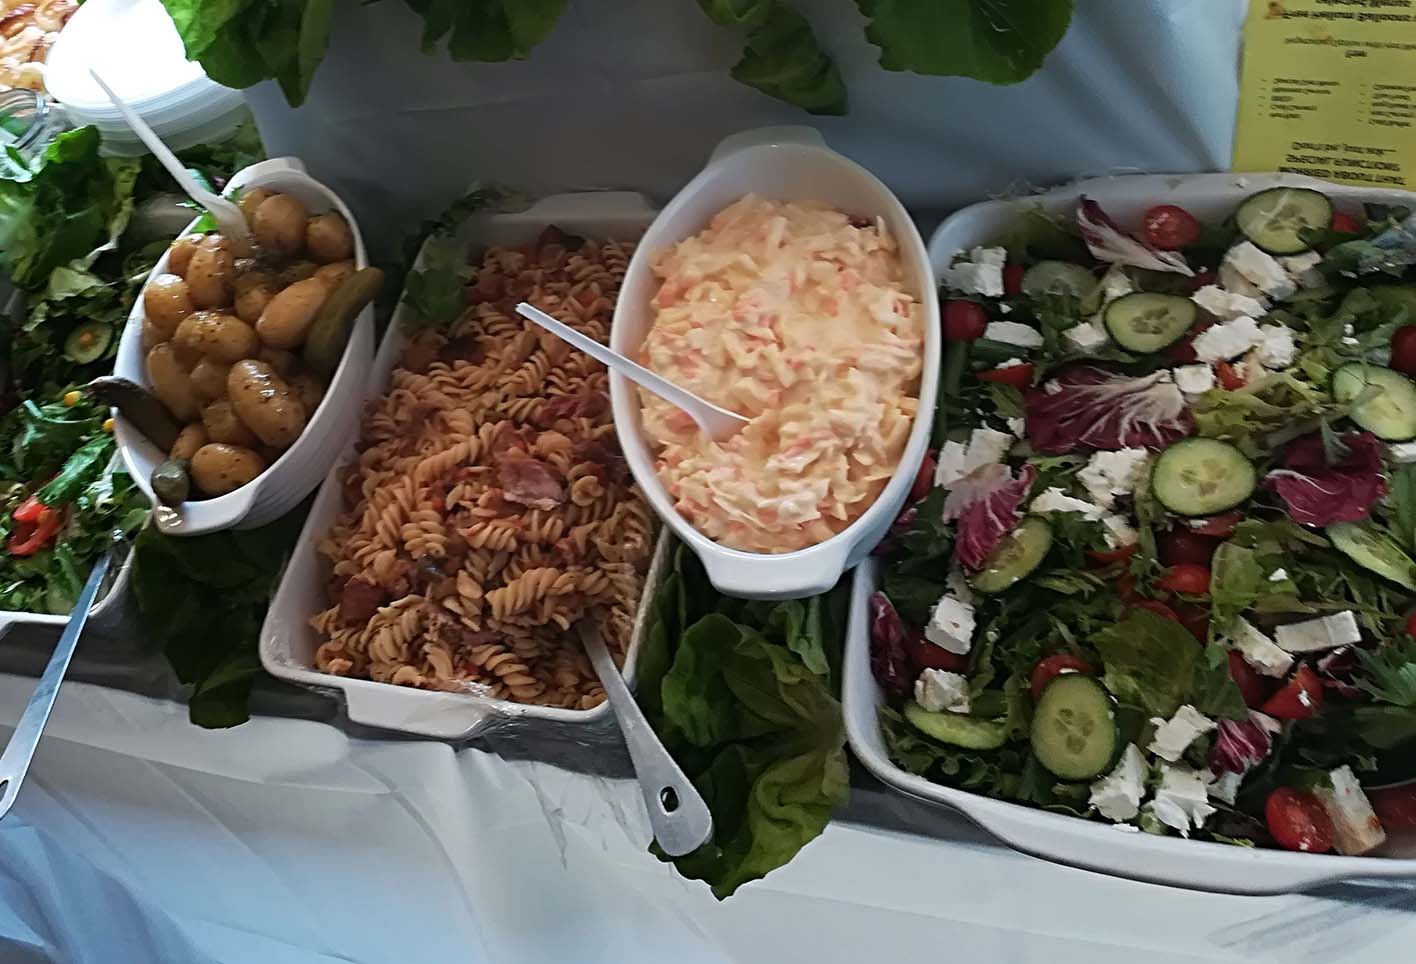 Potatoes, salad and pasta salad laid on a table